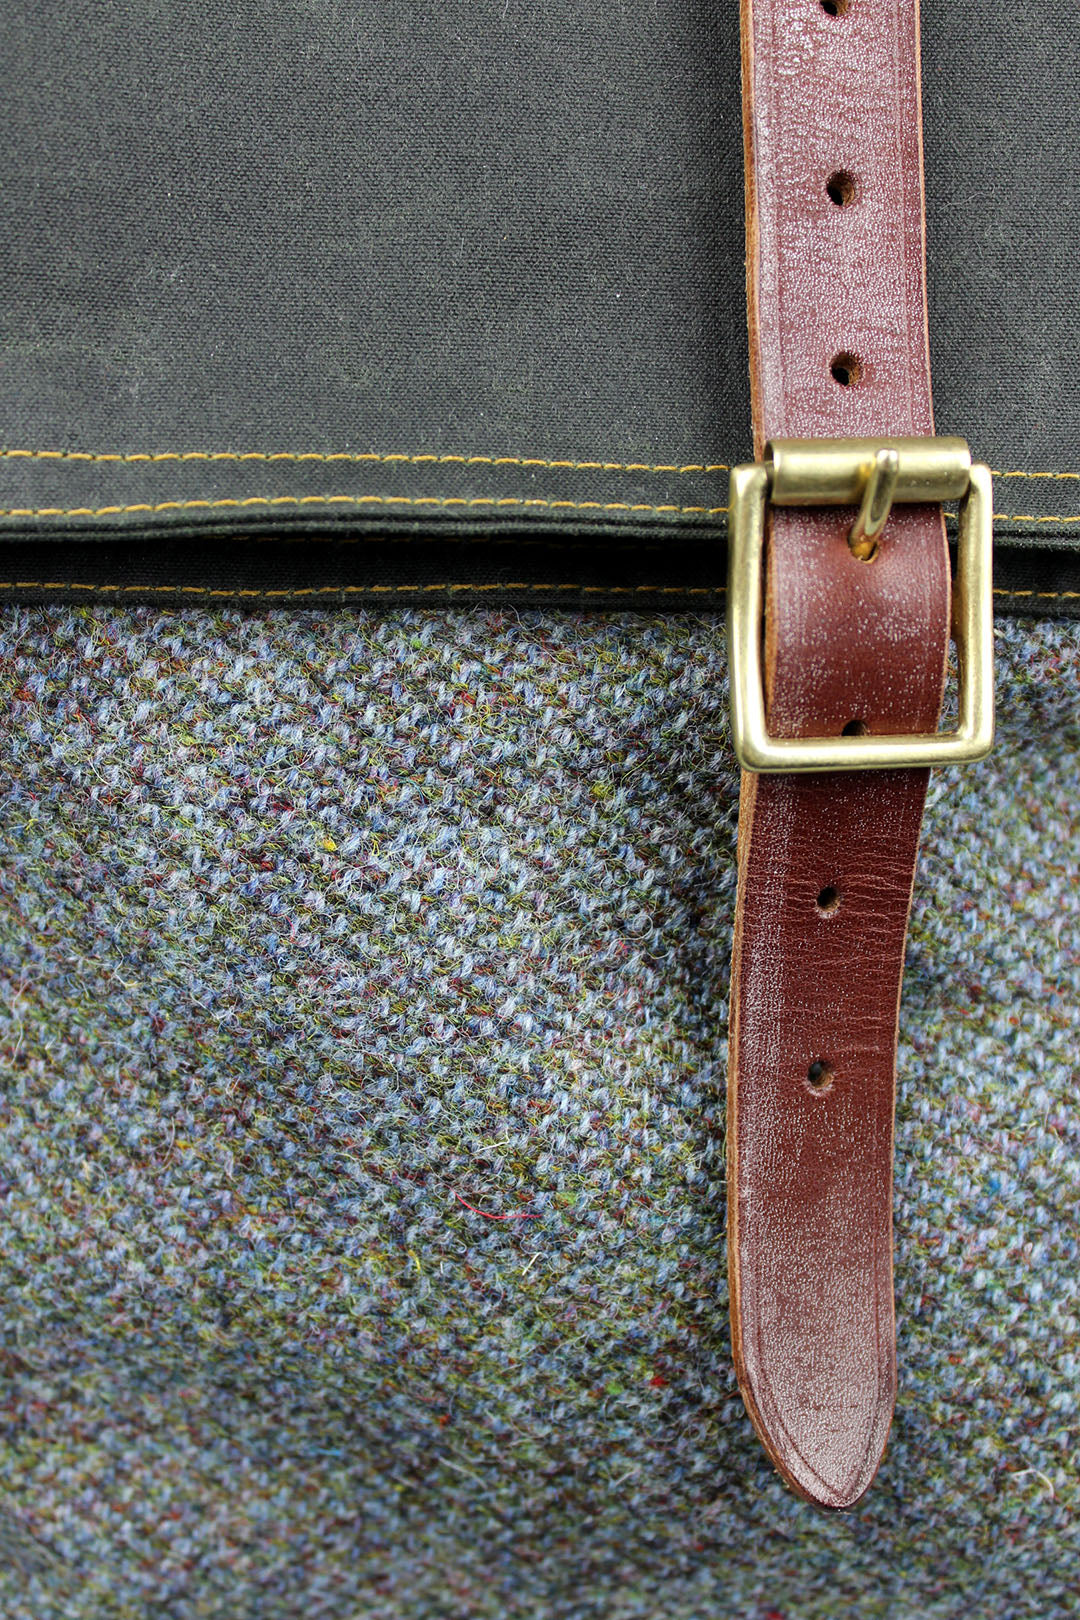 Cairn roll-top bags are a great combination of two Scottish cloths, waxed cotton canvas and Harris Tweed, finished with oak tanned leather.